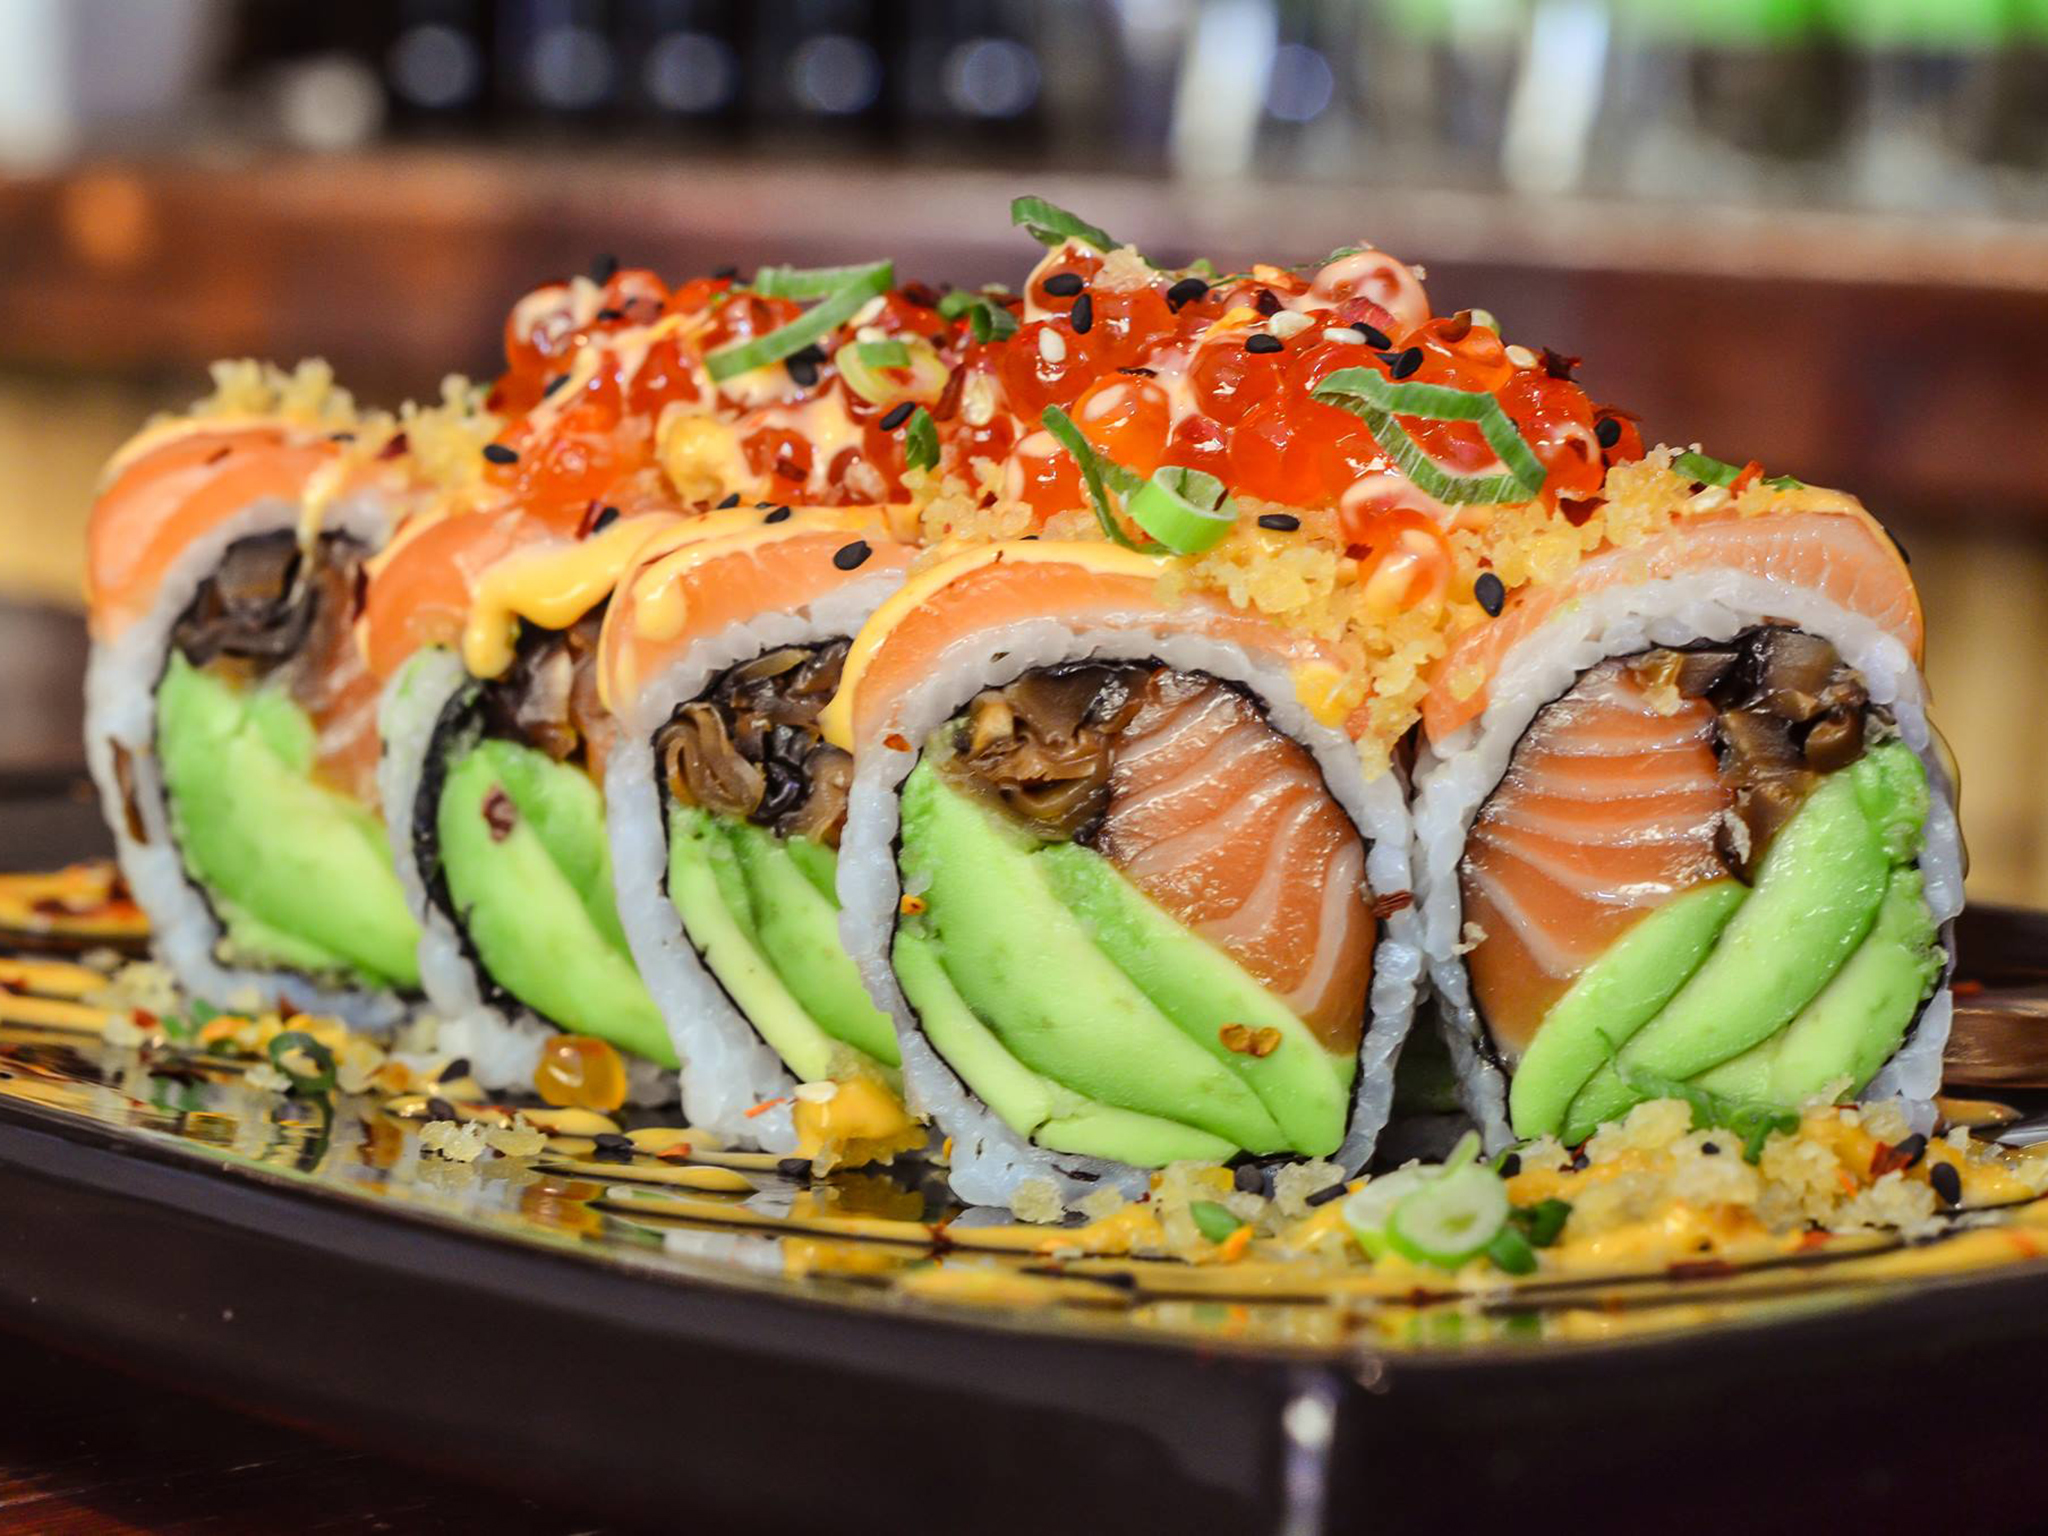 Sushi roll filled with avocado, salmon, and shiitake mushroom, topped with tobiko